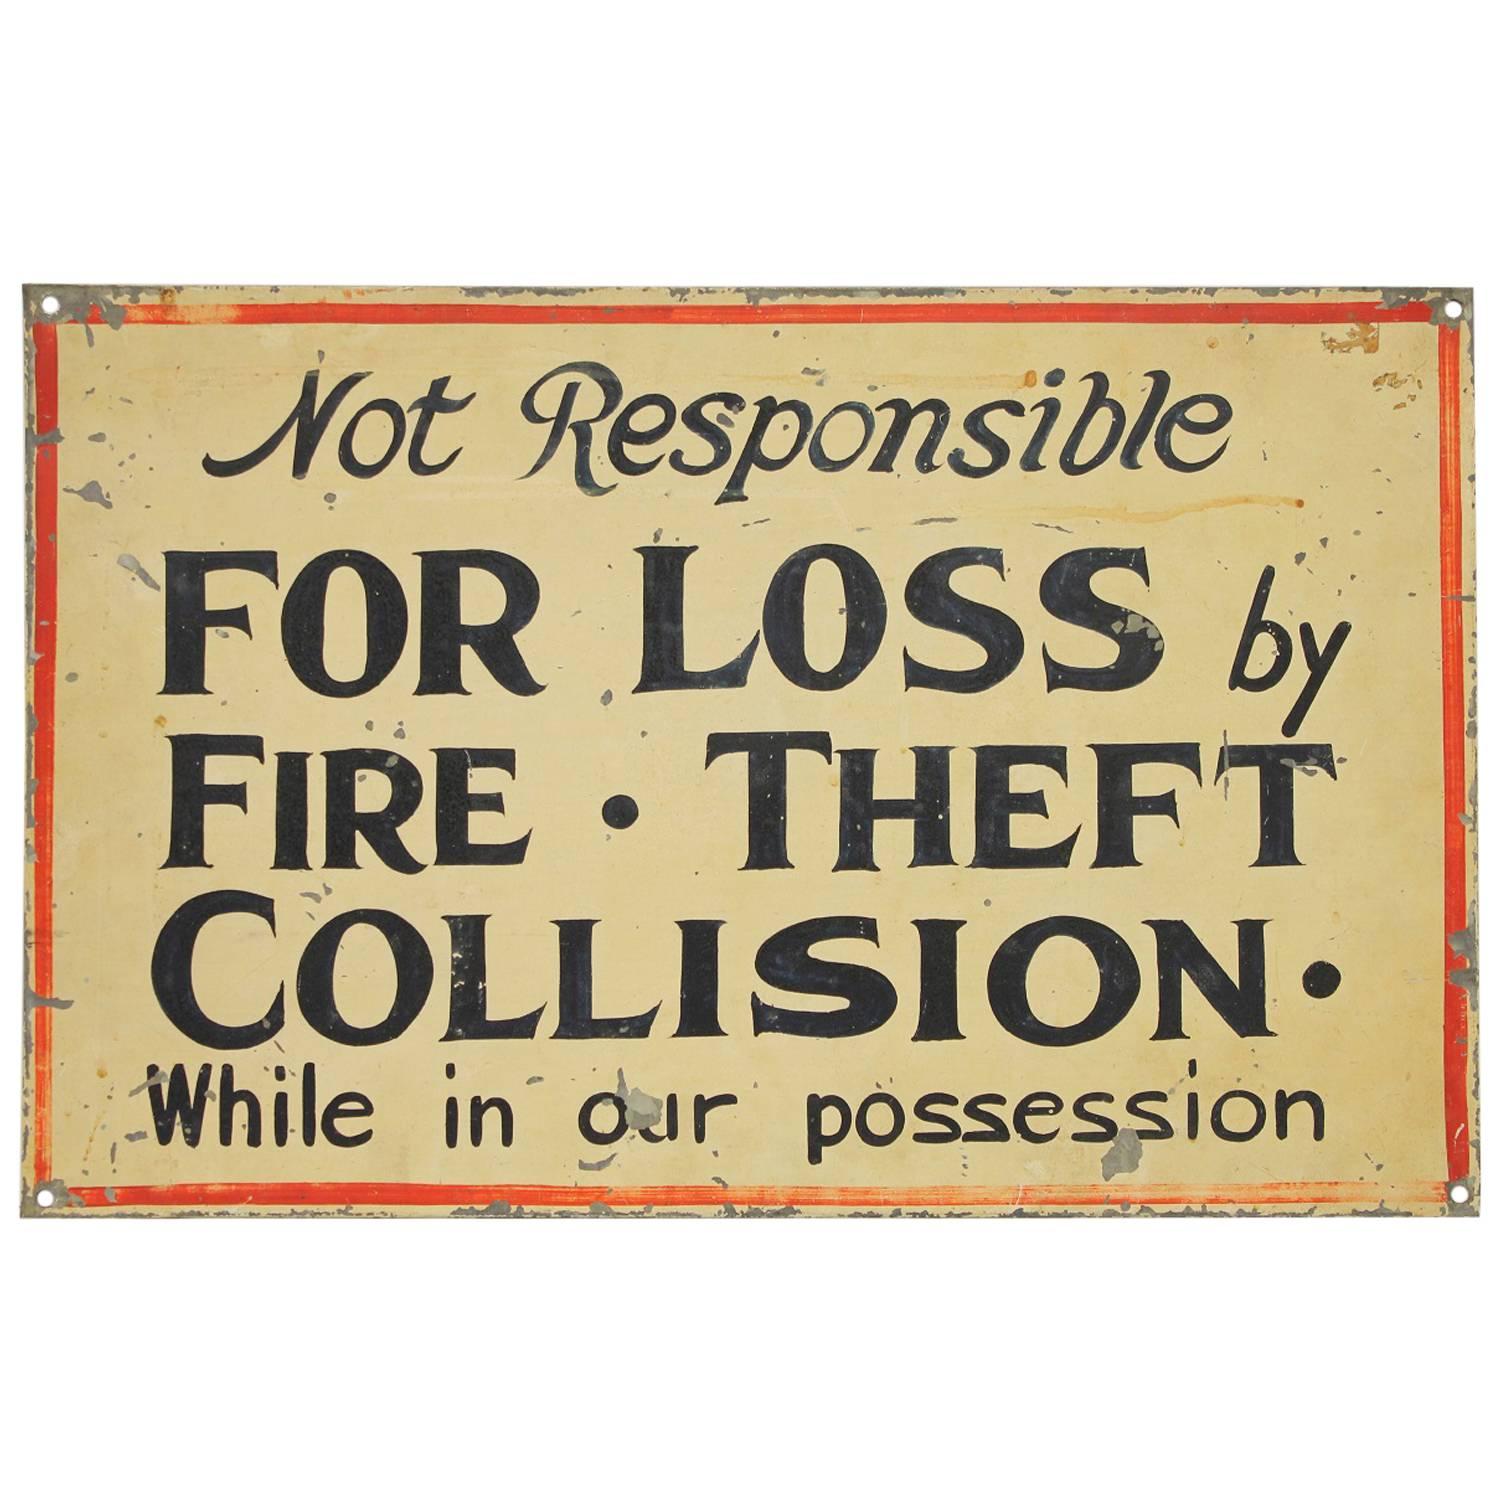 1920s Hand-Painted Tin Sign "Not Responsible for Loss & Theft"